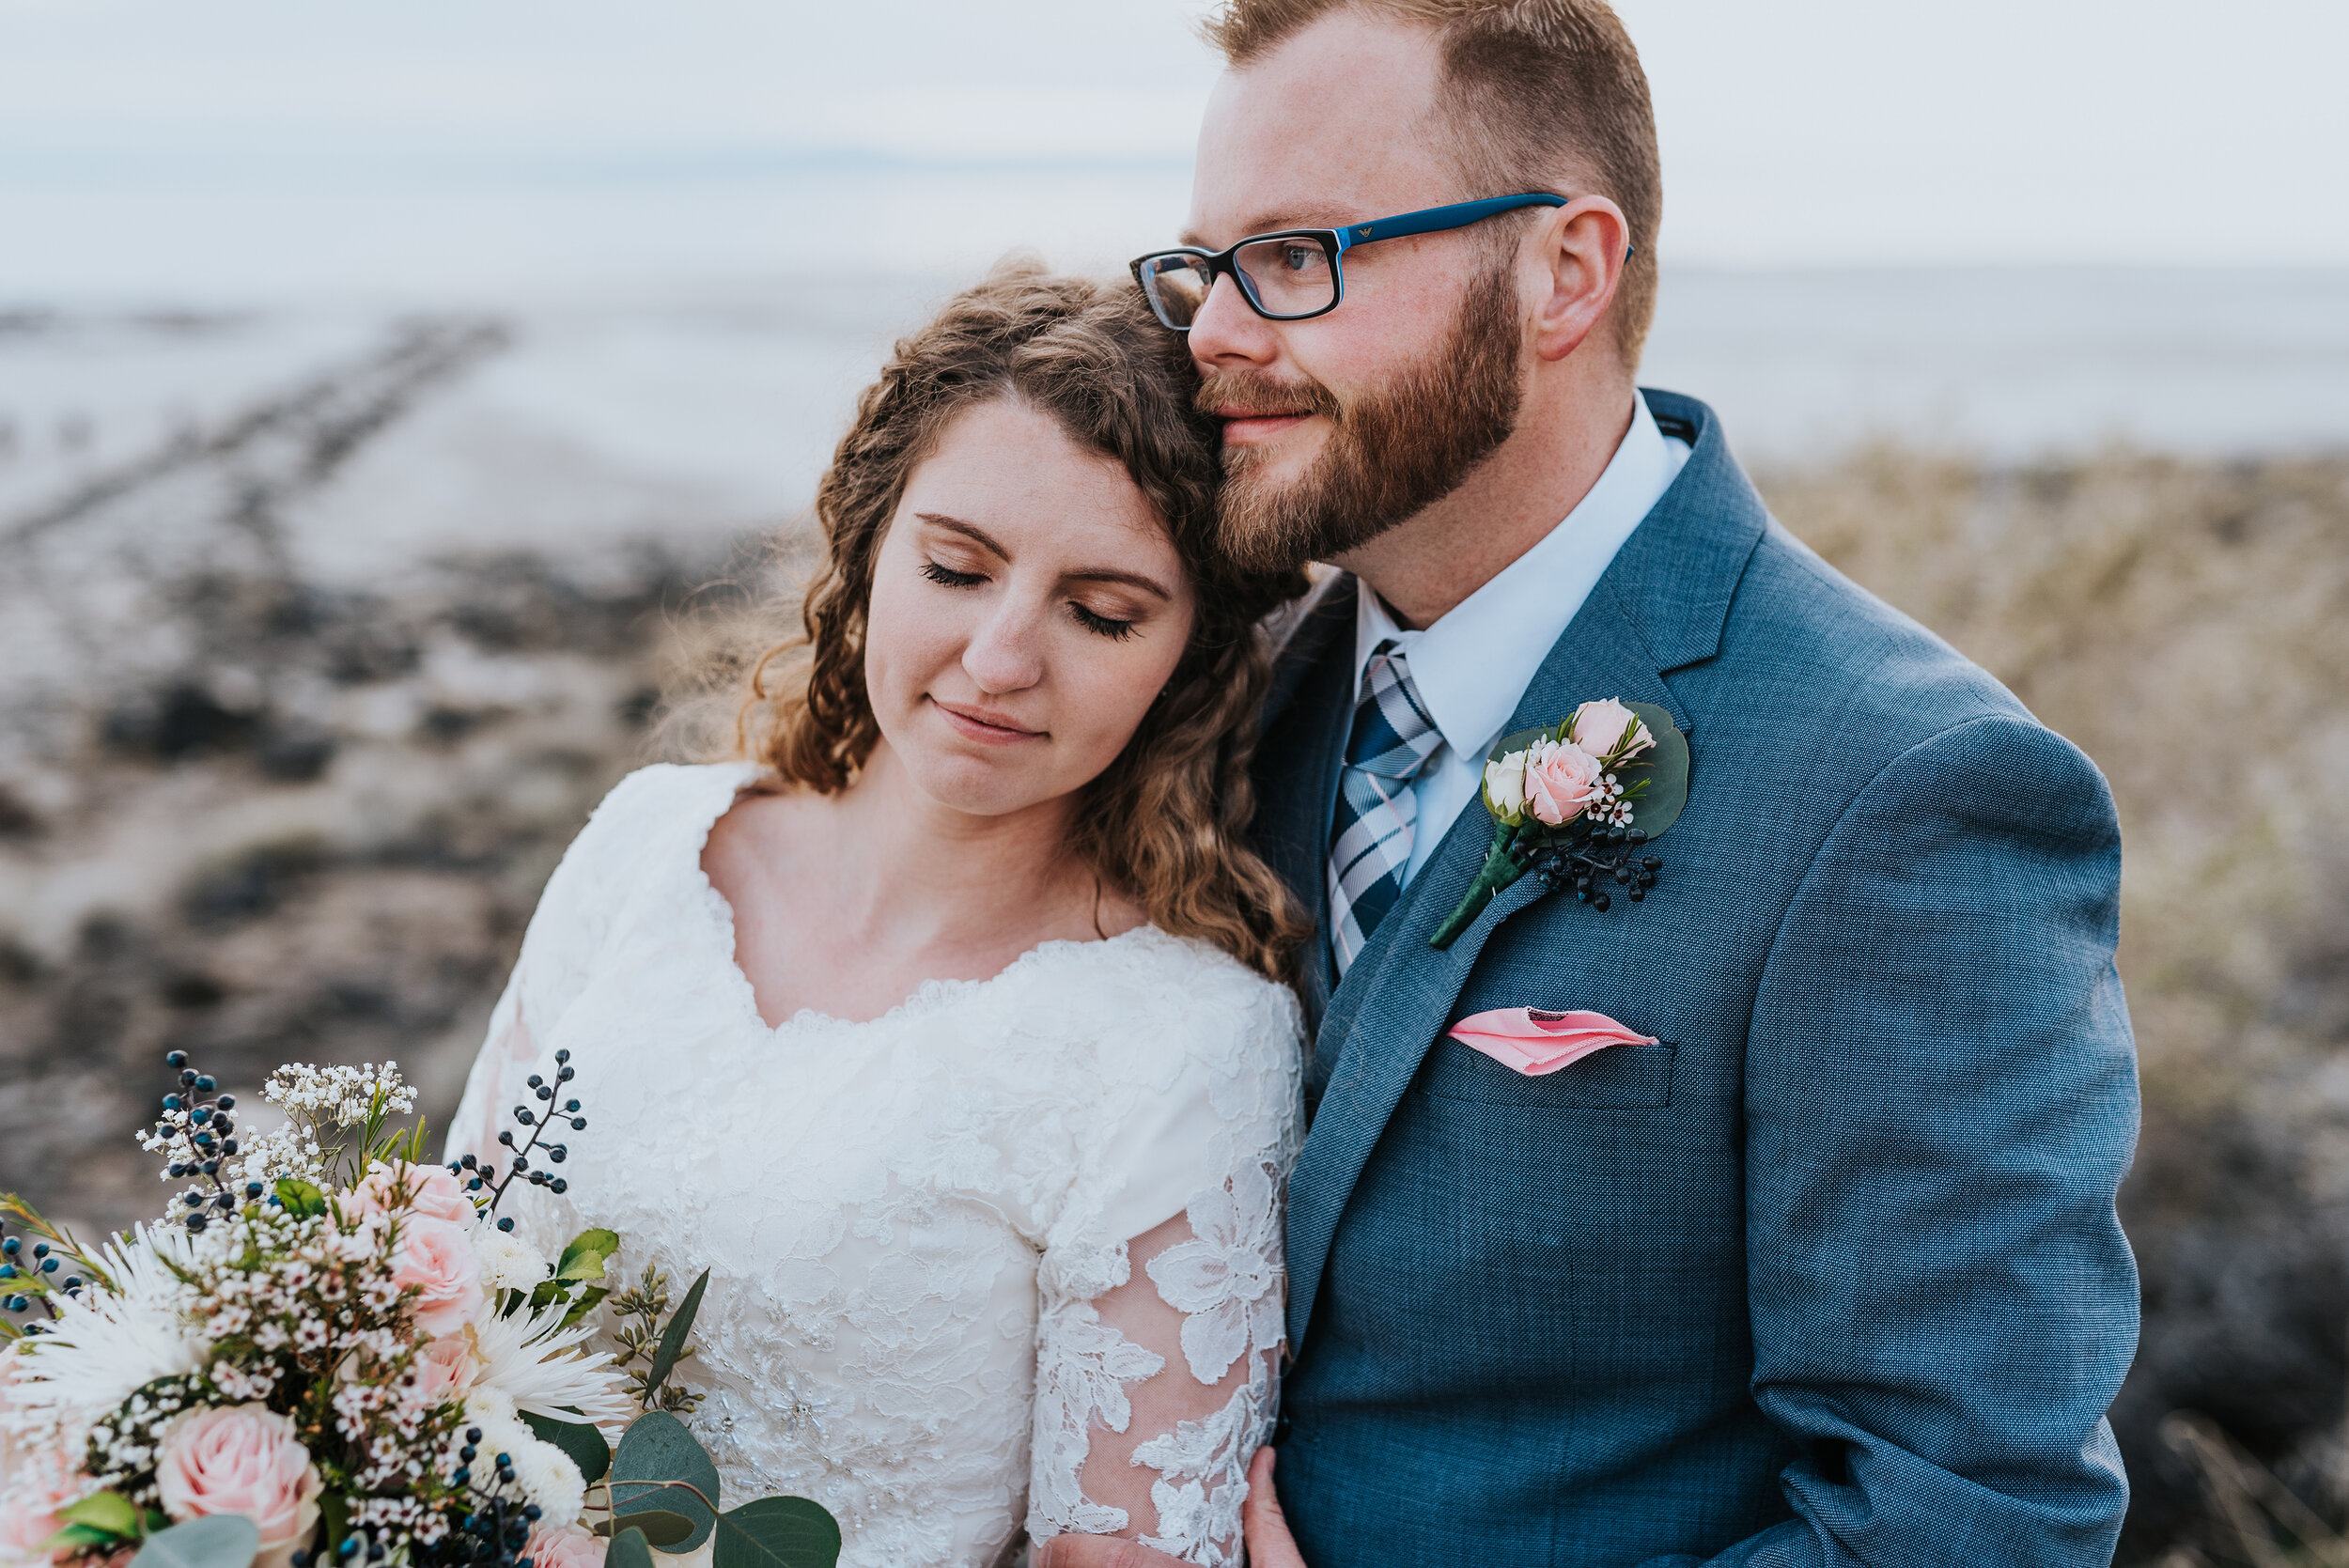  The details this bride and groom displayed were stunning from the light pink pocket square that matched her wedding bouquet to the lace designs on her wedding gown. Stunning wedding formal photoshoot in Spiral Jetty Northern Utah Great Salt Lake photography wedding formals natural photo aesthetic bride and groom #spiraljetty #utahphotography #weddingformals #gettingmarried #weddingattire #utahwedding #greatoutdoorswedding #weddingformalsphotoshoot #naturalbeauty 